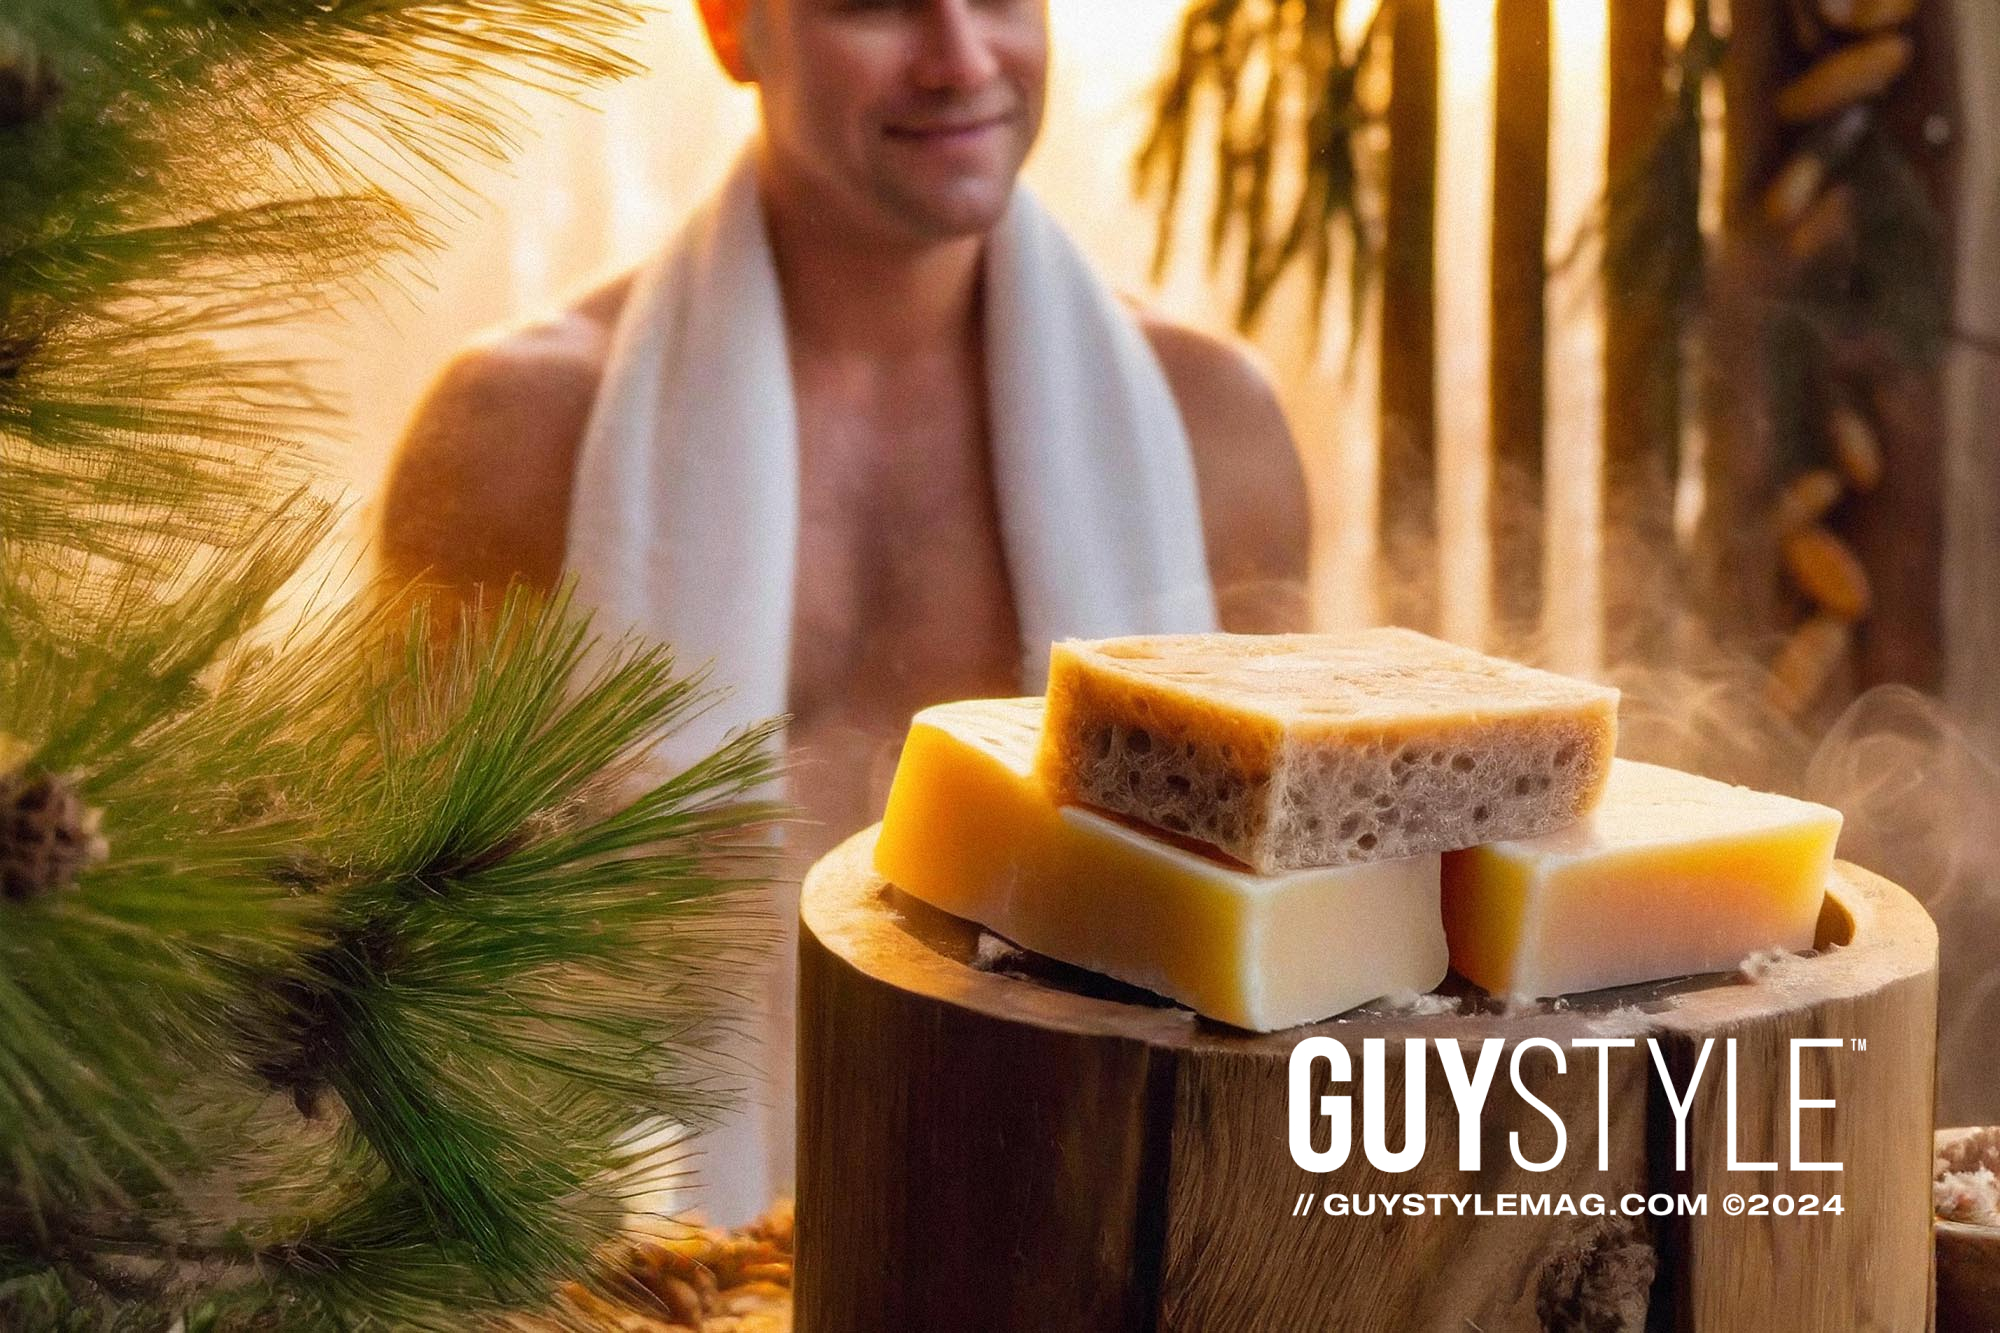 Ditch the Chemicals, Embrace the Earth: Top Natural Soap Bars for Men – Presented by HARD NEW YORK Skincare for Men